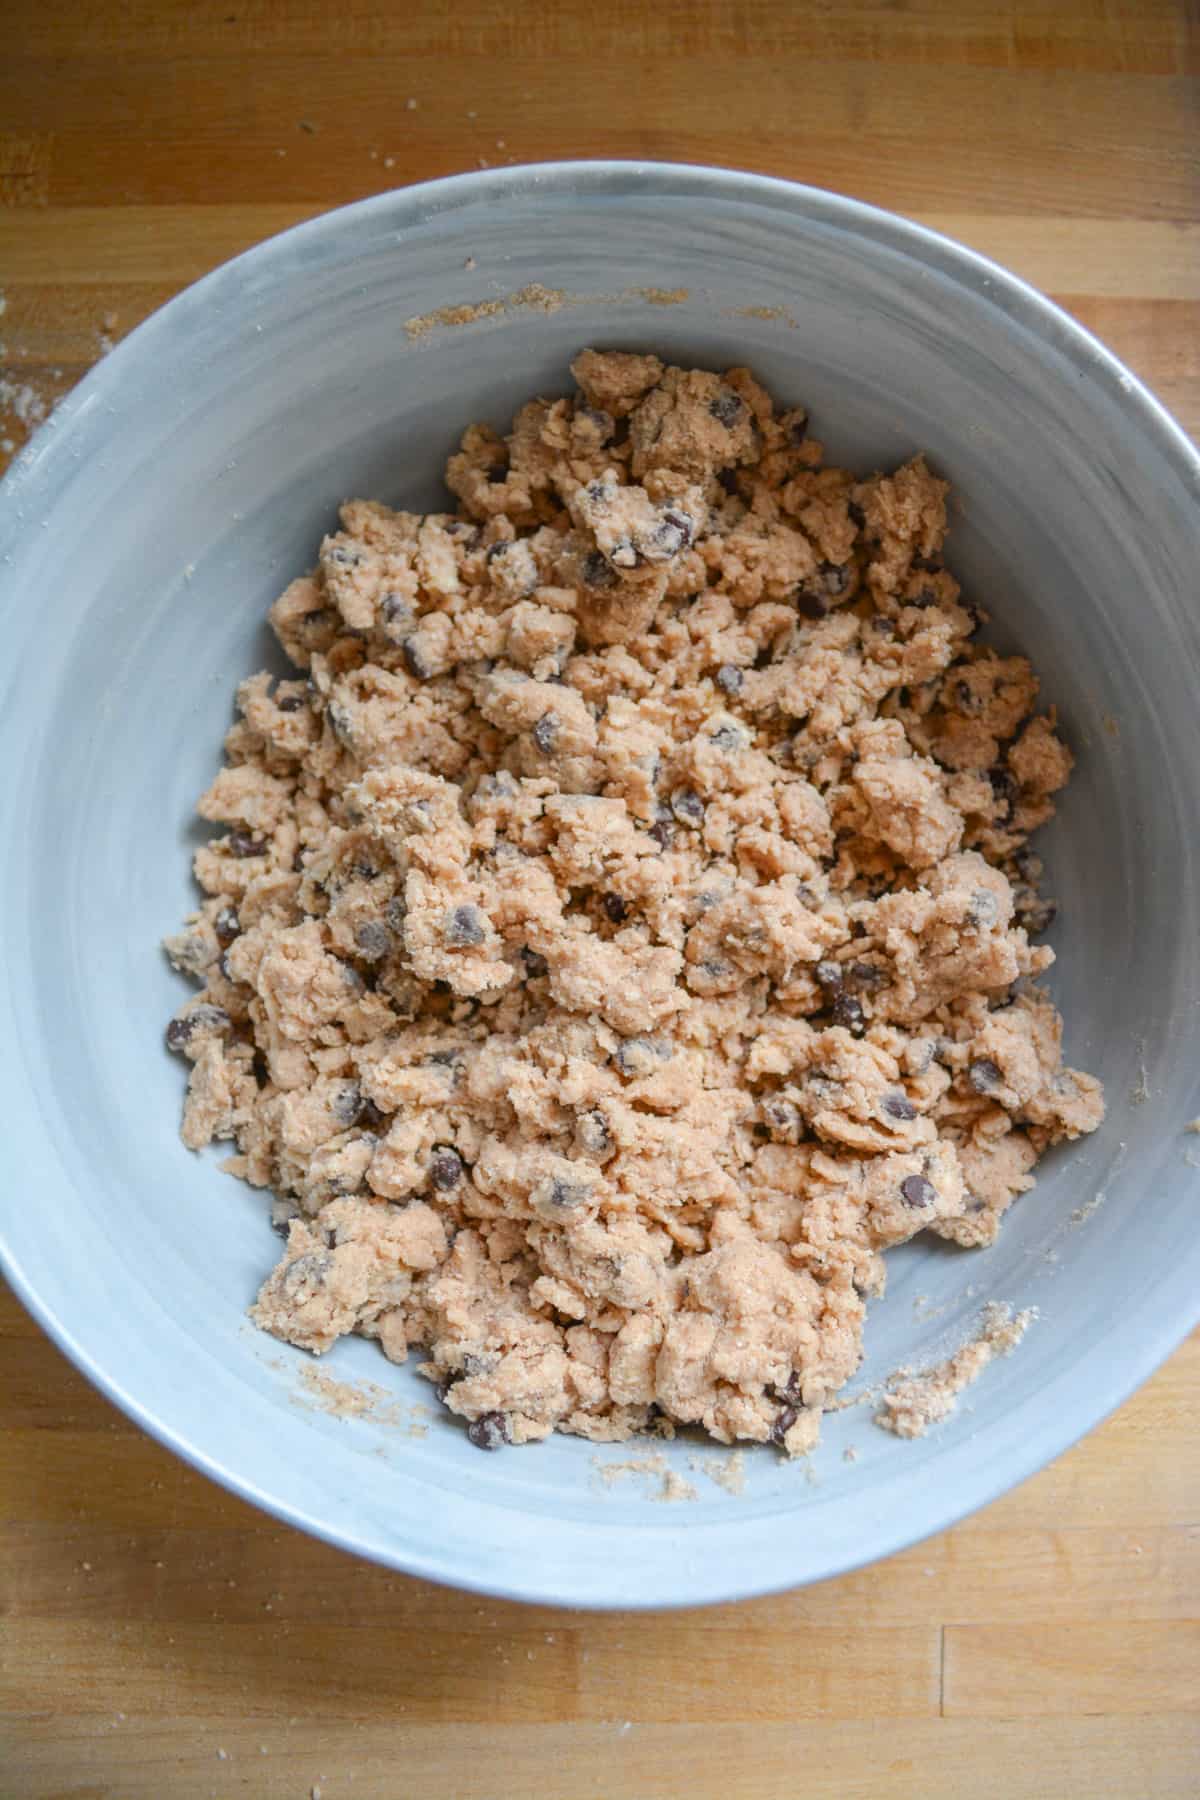 Wet ingredients mixed in to form the Vegan Chocolate Chip Cinnamon Scone dough.